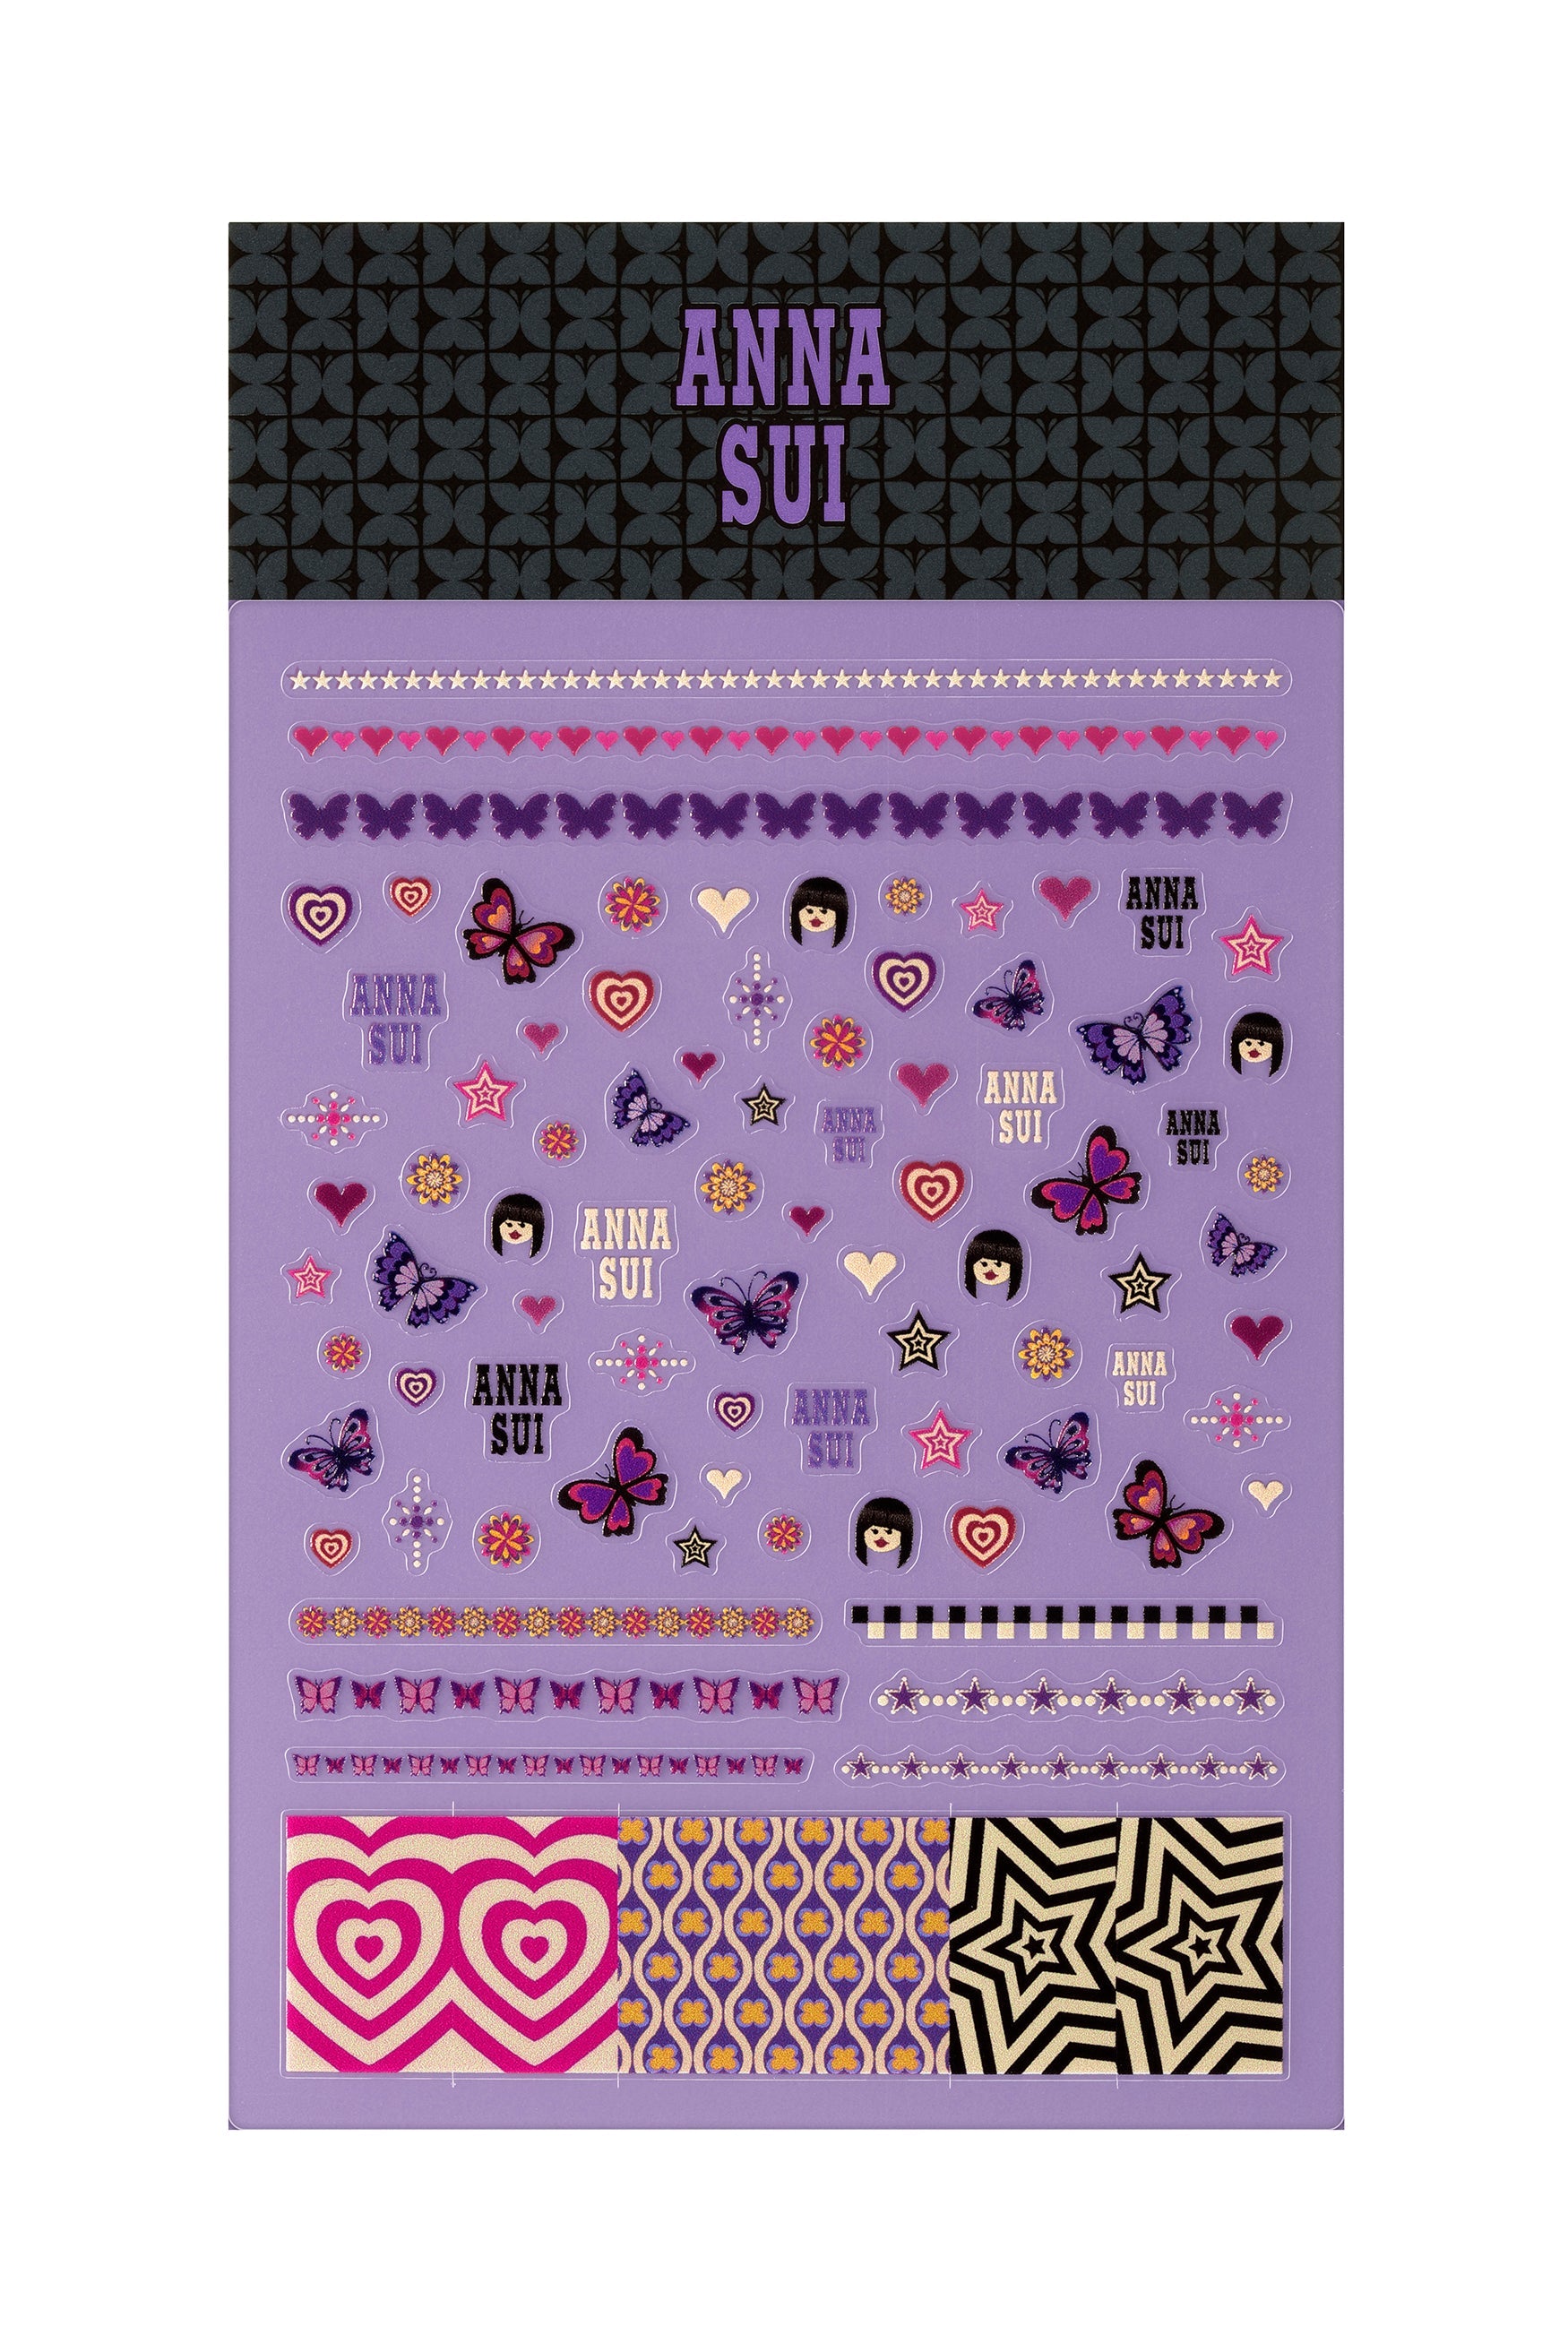 Nails Stickers inspired by Anna Sui's favorite butterflies, hearts, stars, iconic signature character face